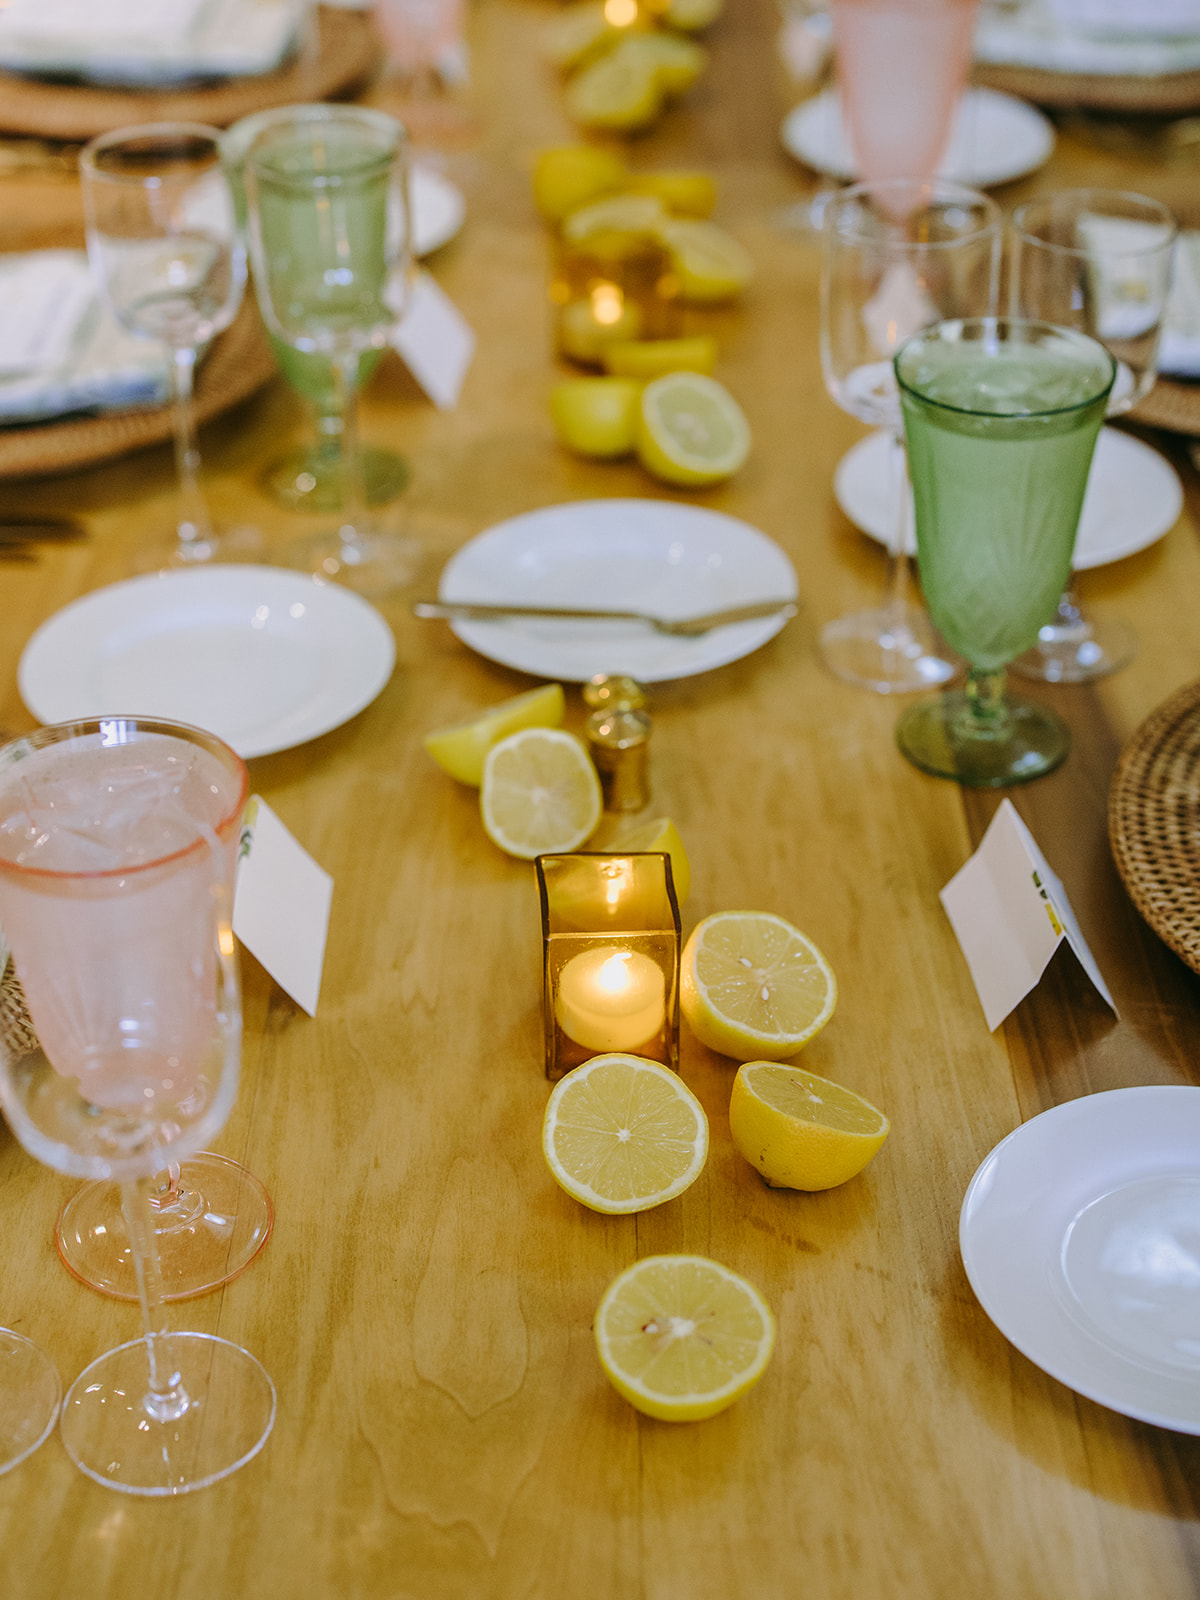 tables were adorned with vibrant lemons, oranges, and grapefruits